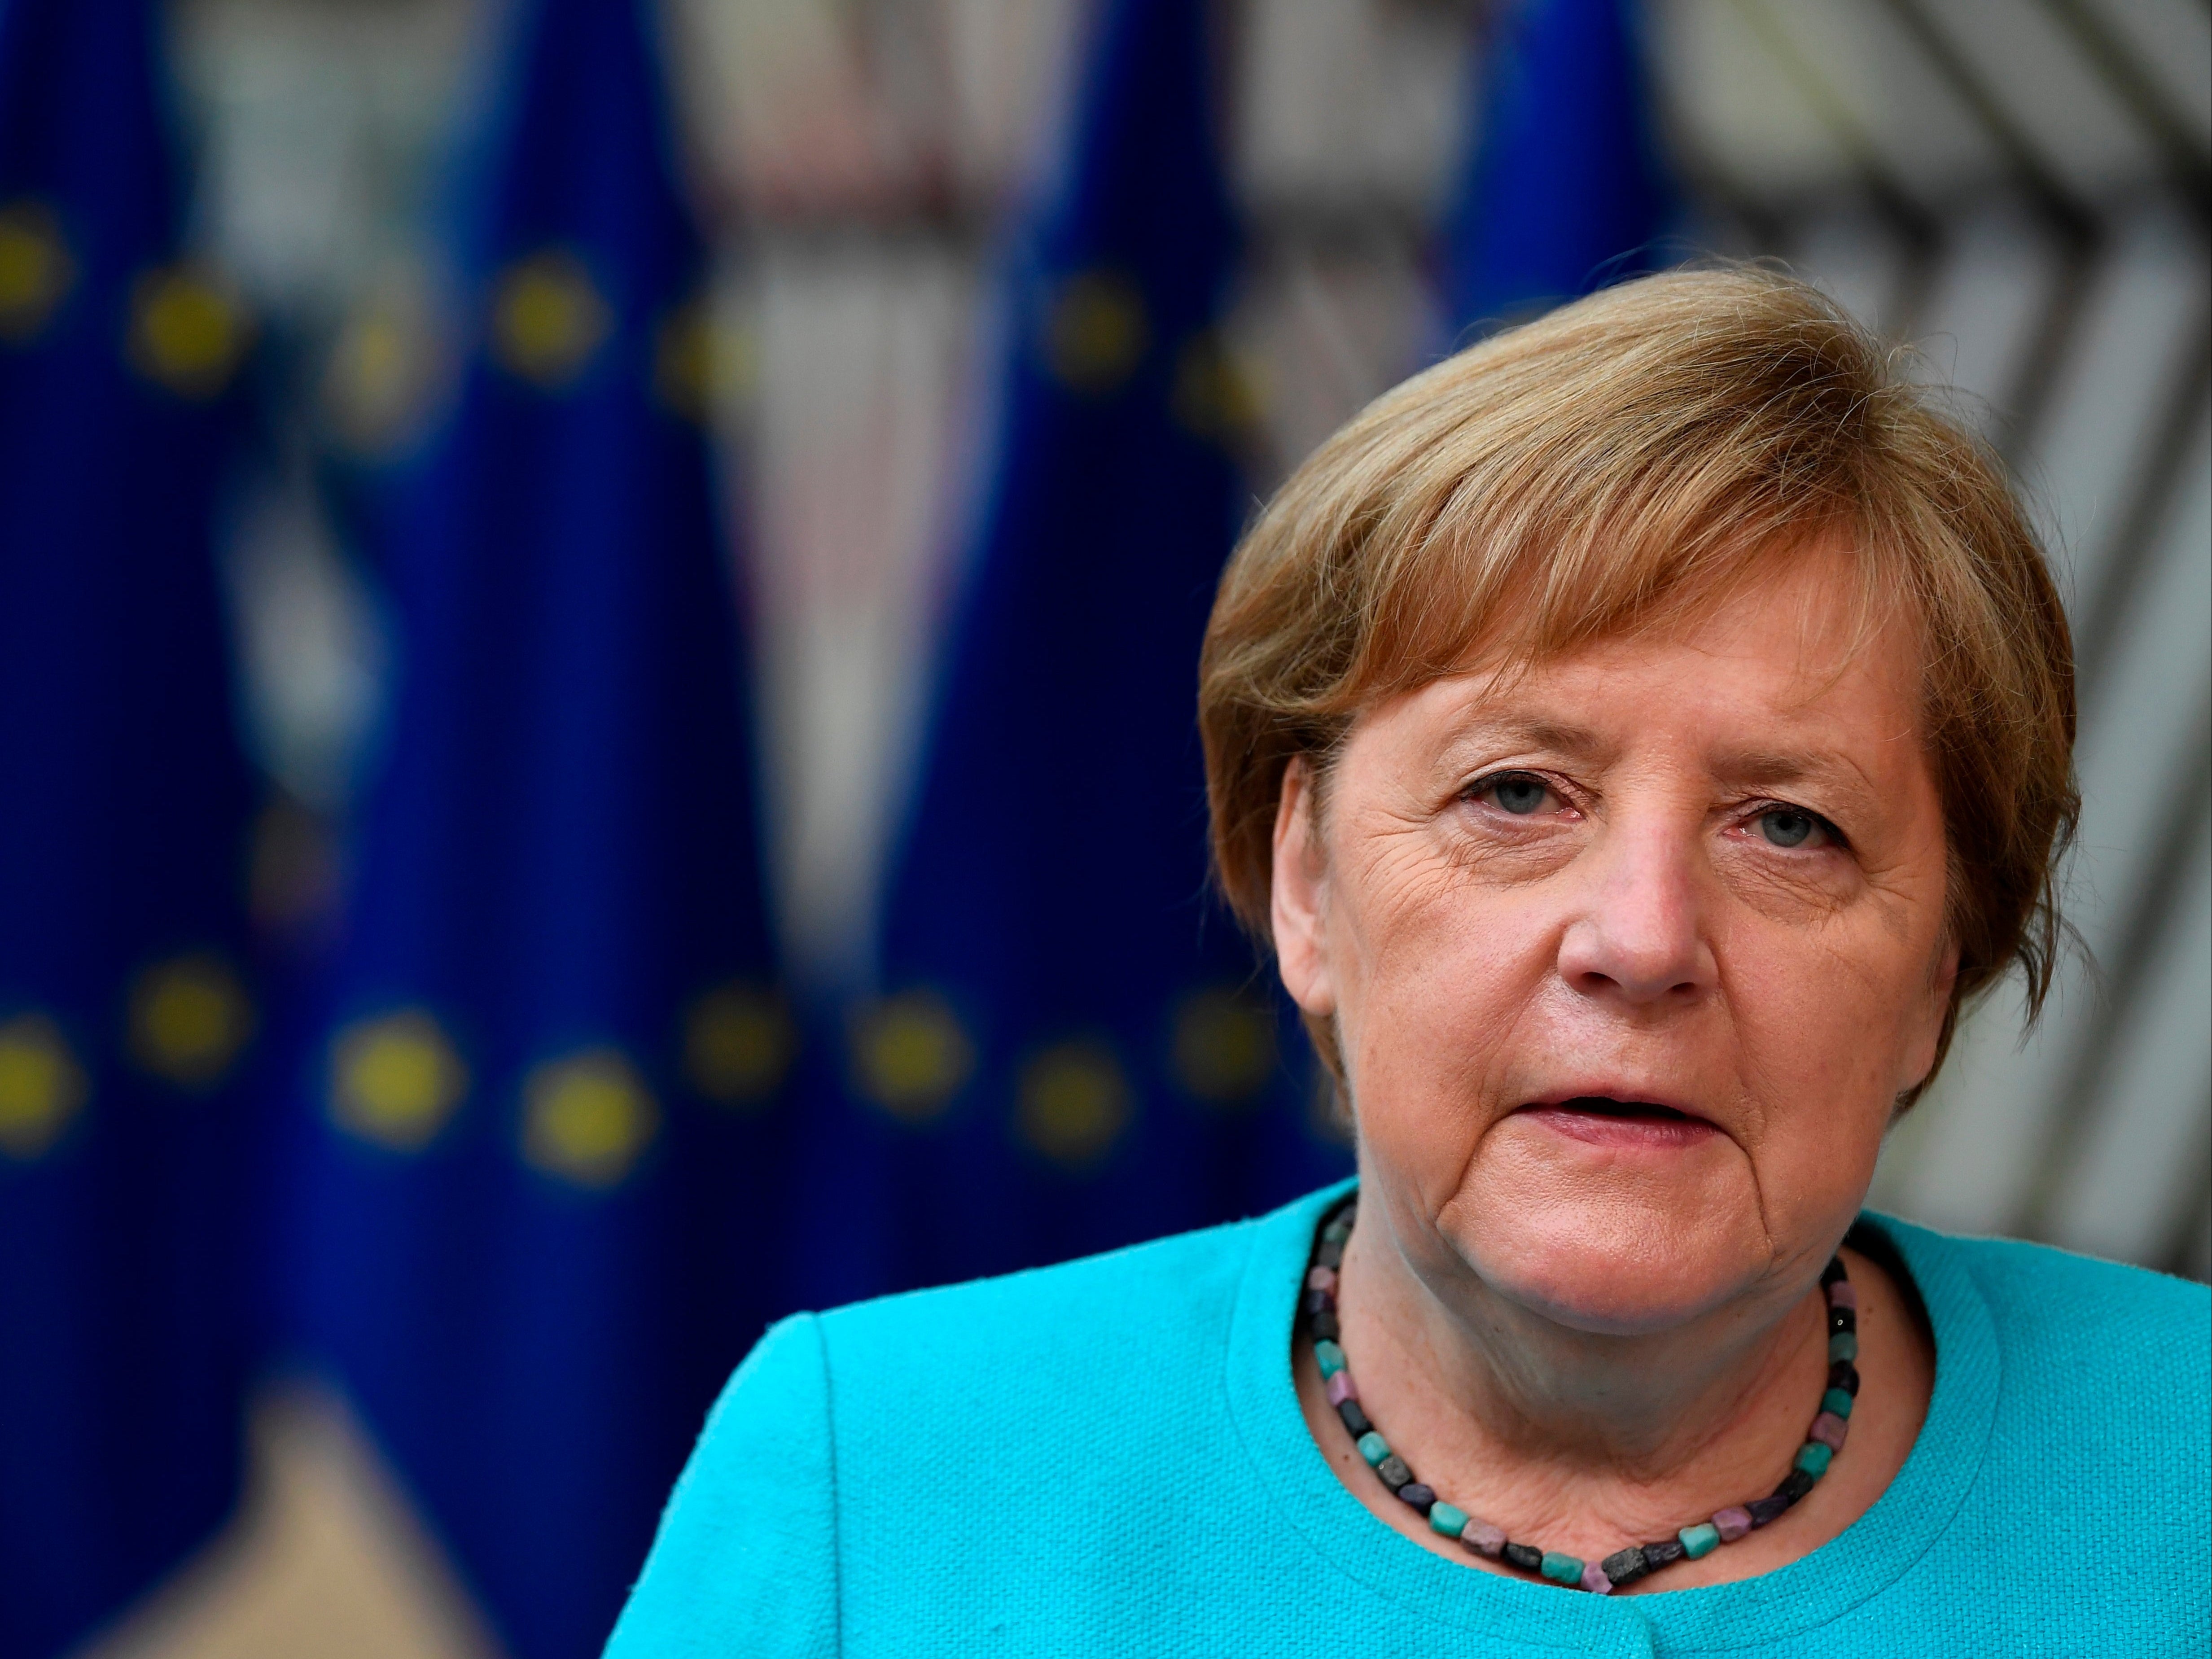 Merkel to visit PM at Chequers today